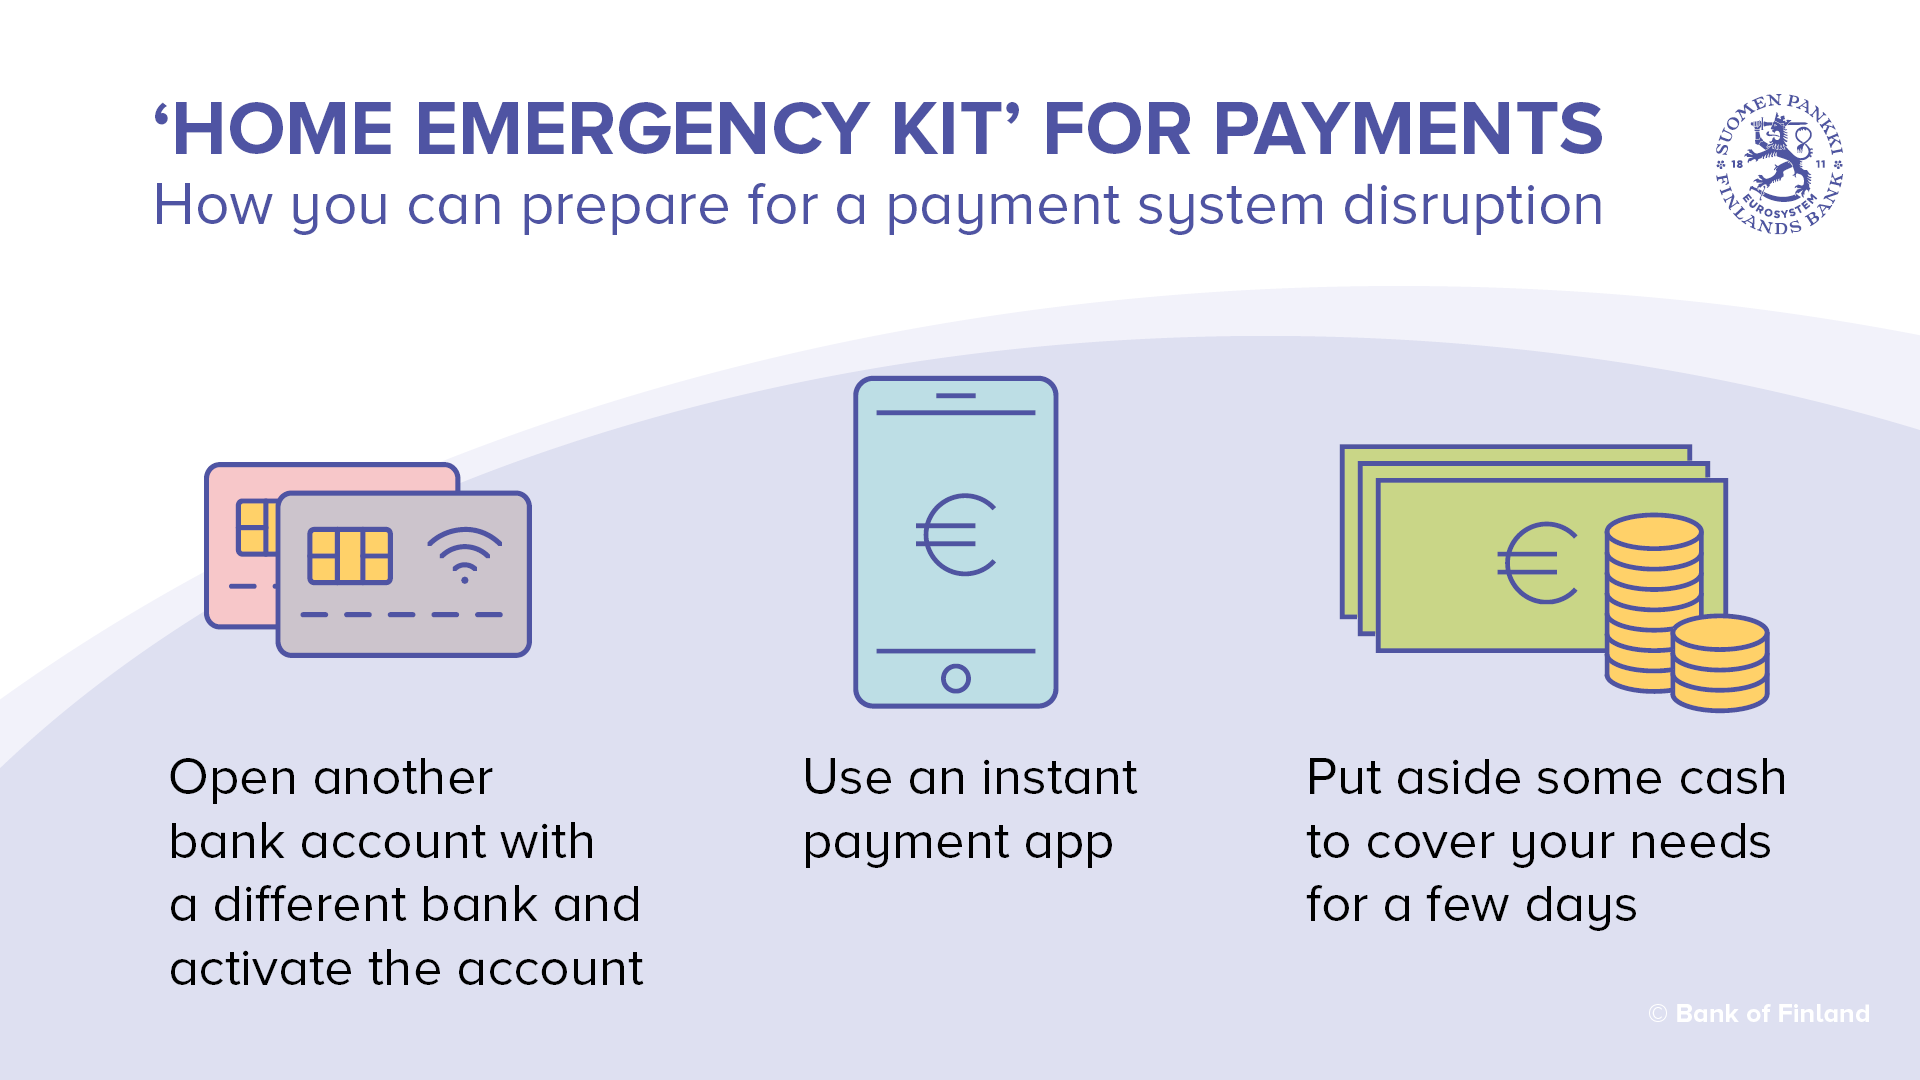 Home emergency kit for payments